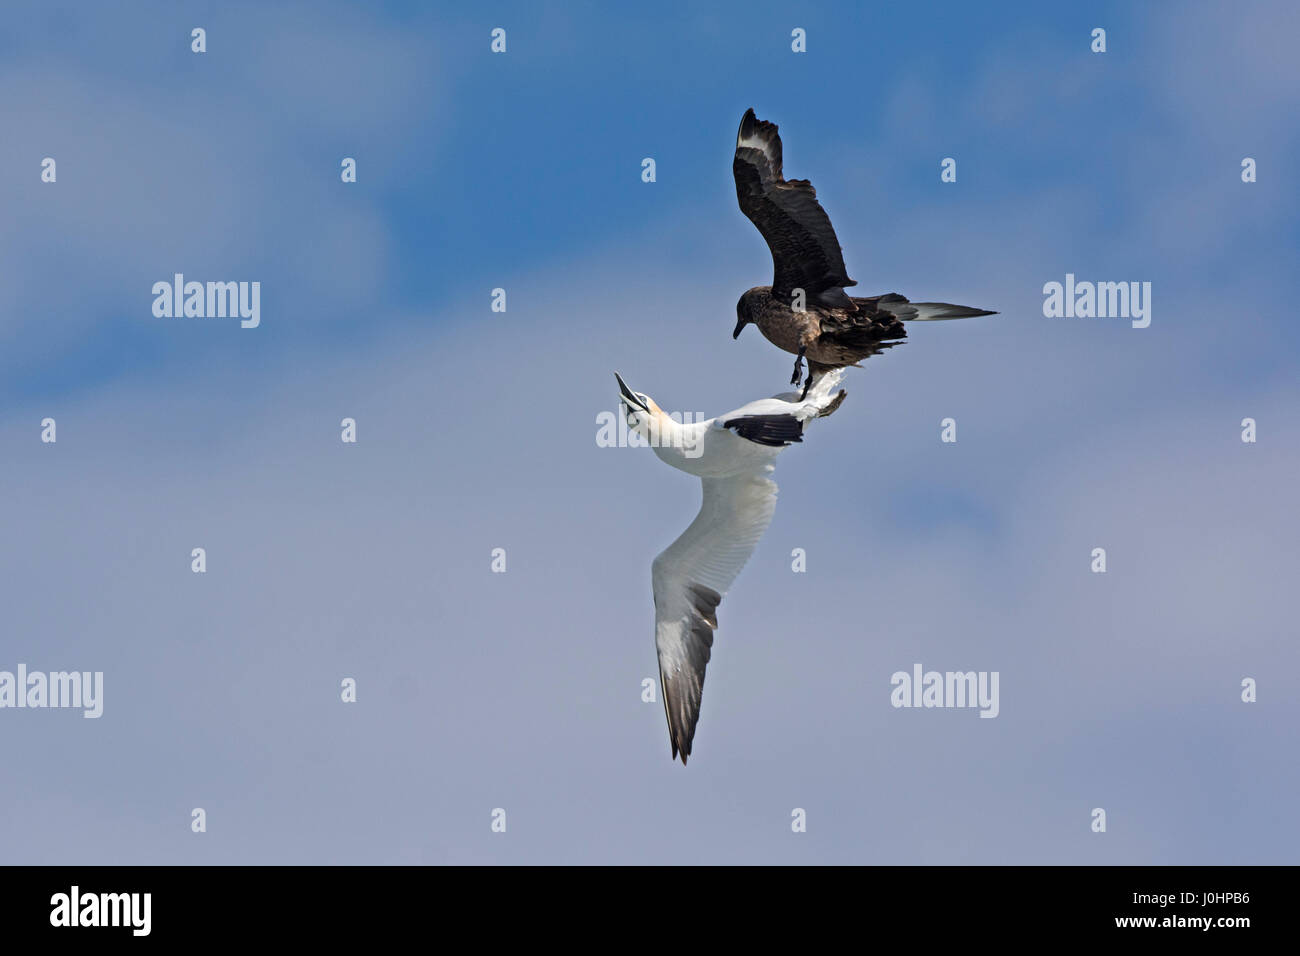 Great Skua Stercorarius skua attacking Gannet on route ack to its colony, to make it disgorge fish, behaviour known as Kleptoparasitism (parasitism by Stock Photo